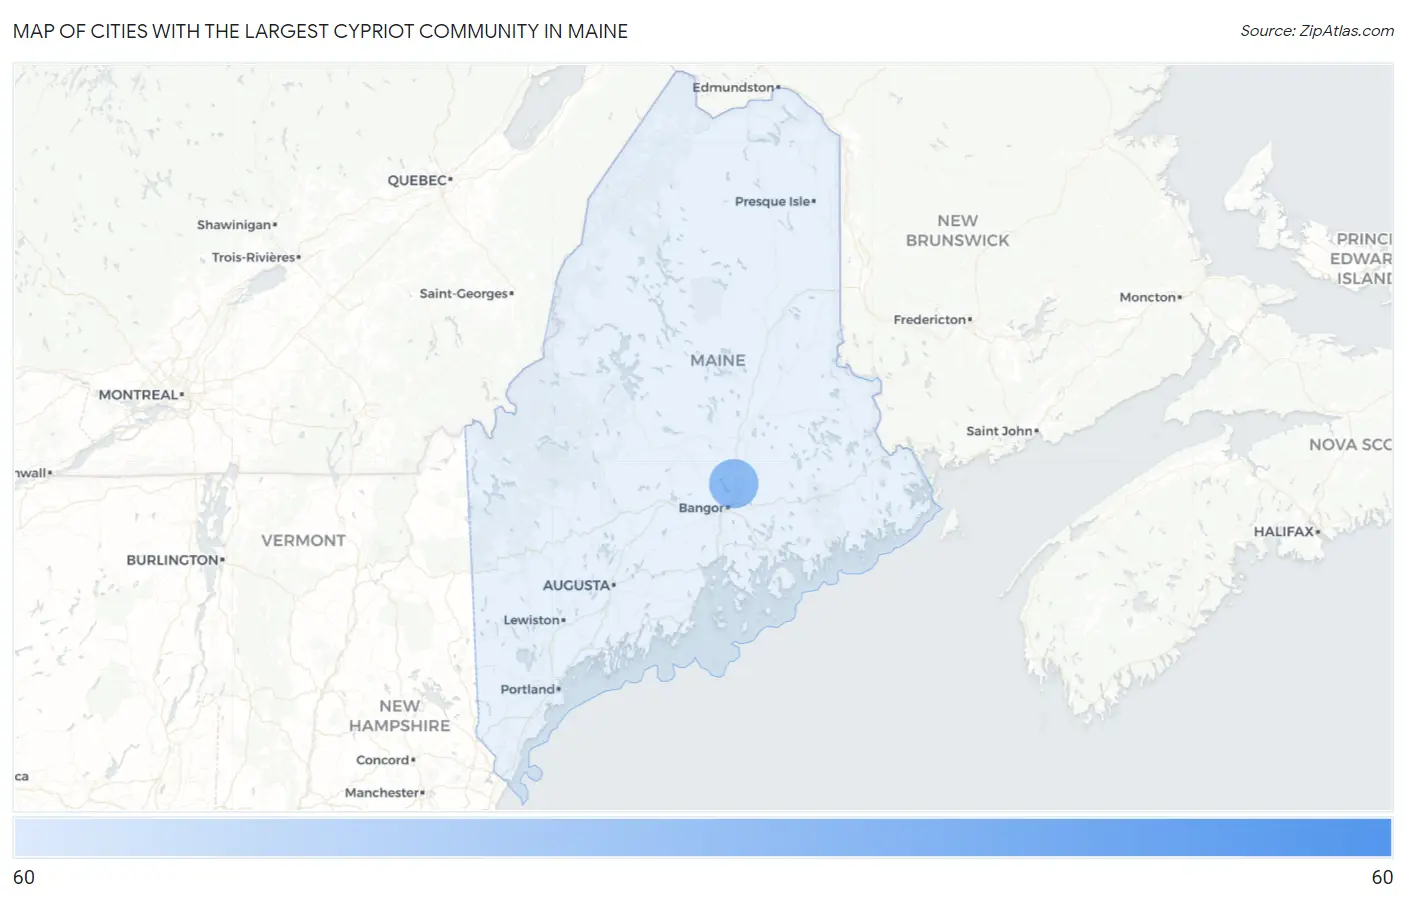 Cities with the Largest Cypriot Community in Maine Map